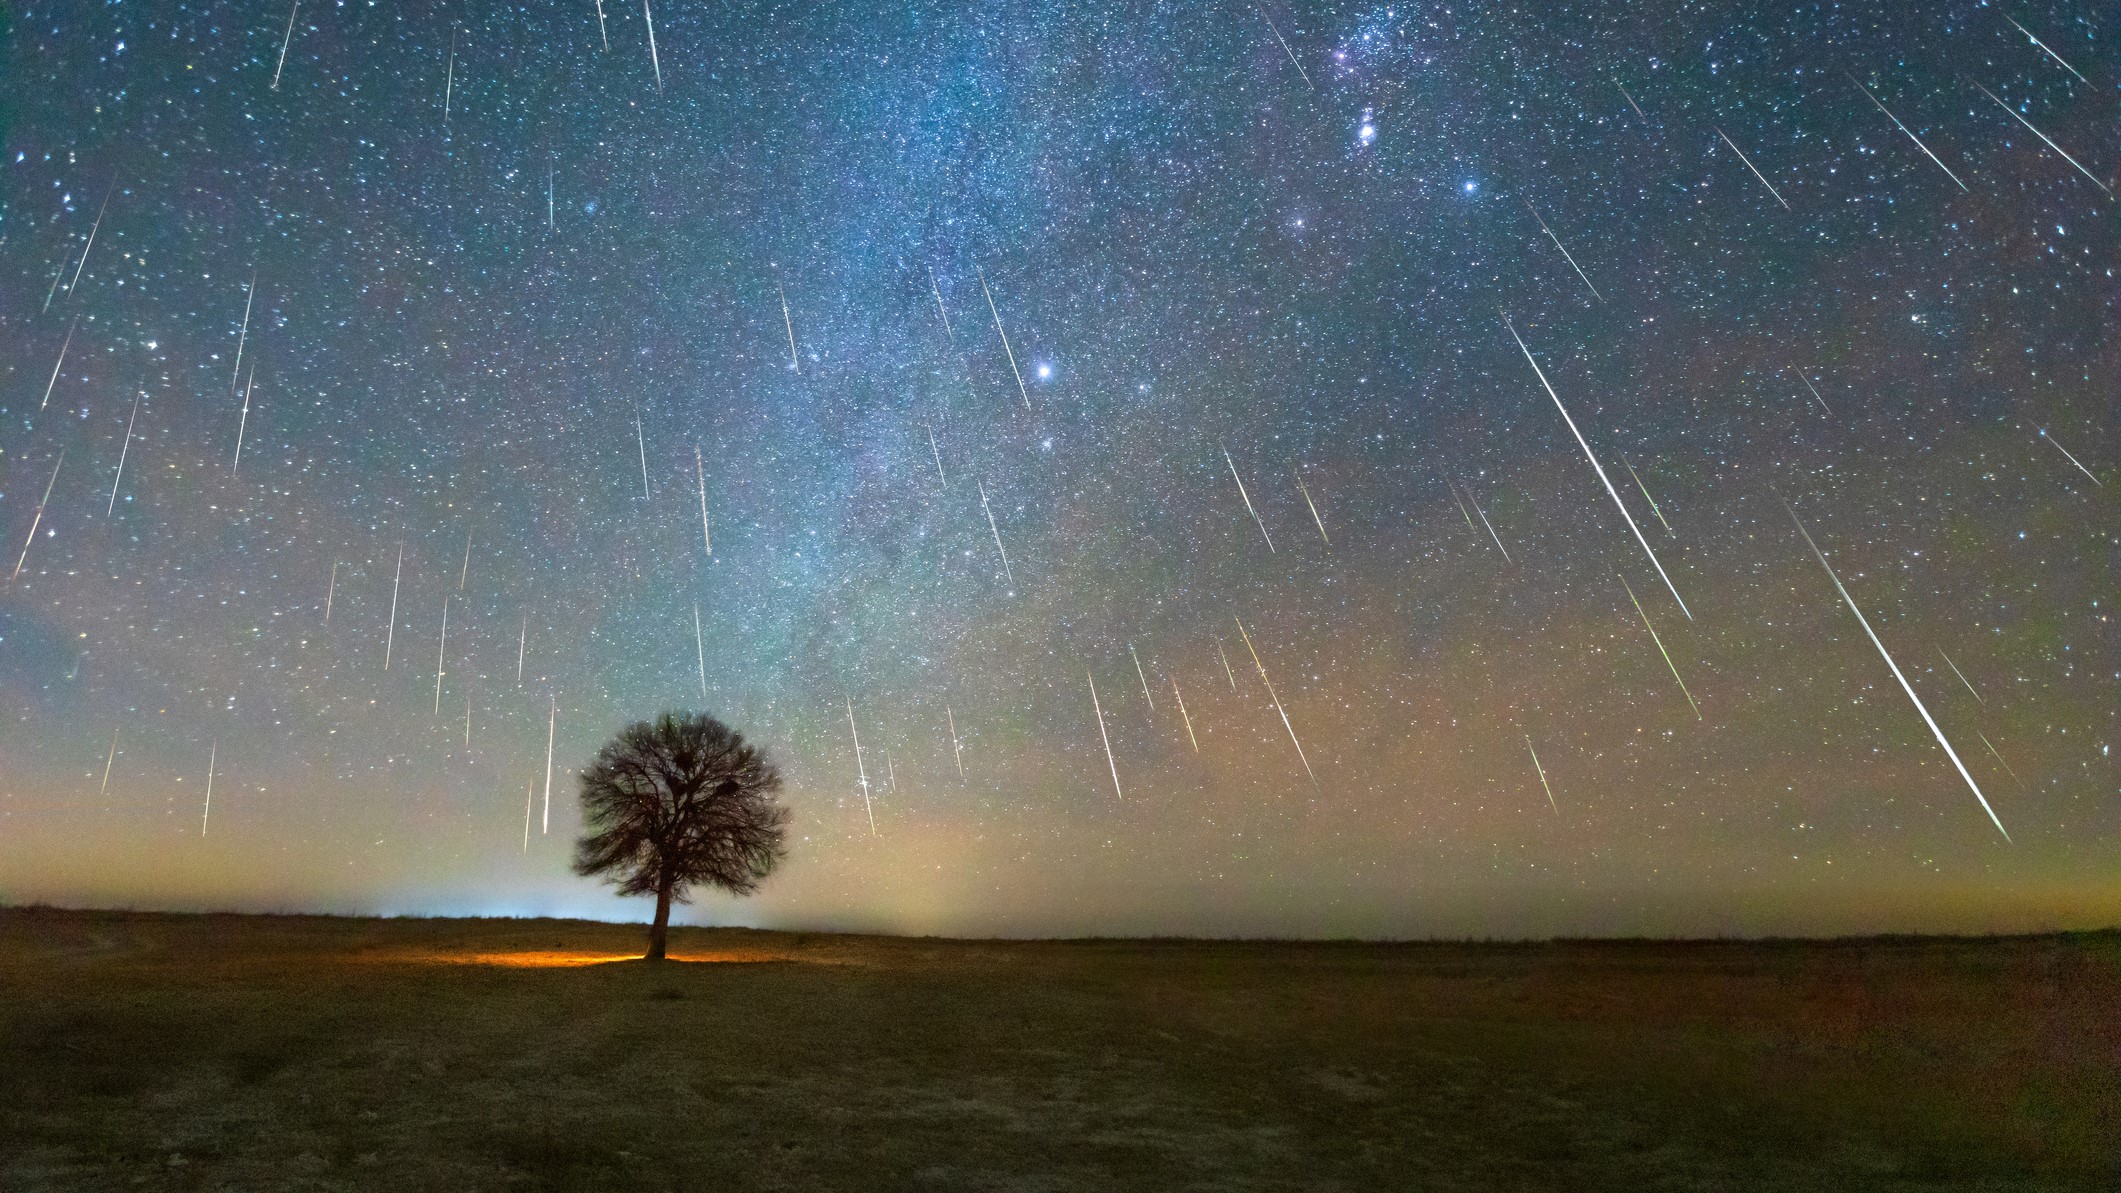 Geminid meteor with tree silhouette in the foreground.